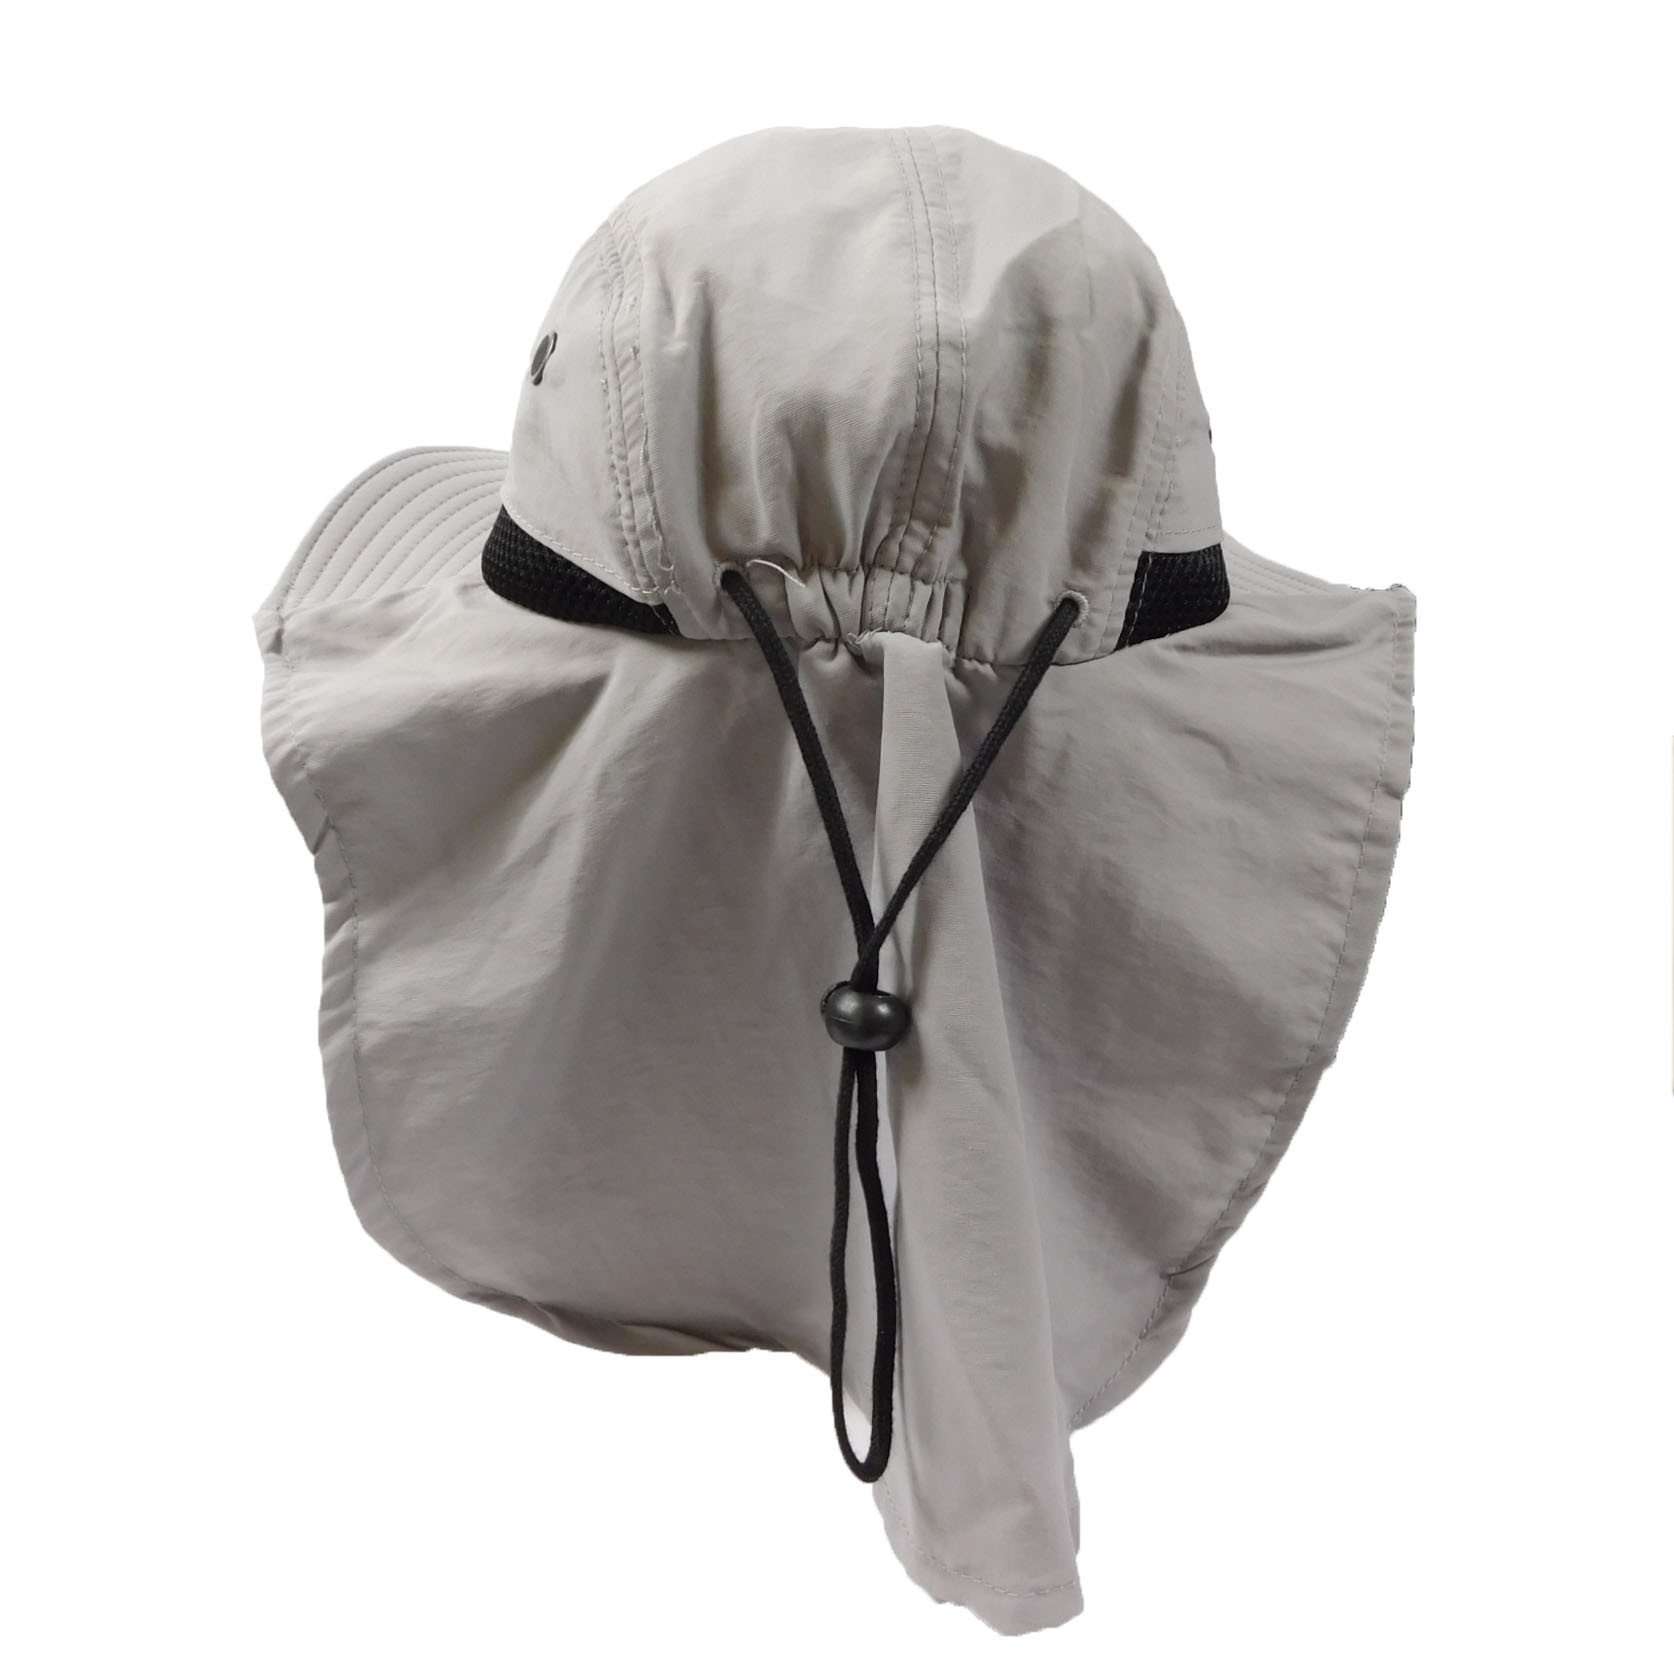 Large Bill Flap Cap for Fishing or Hiking - Neck Cape for Extra Sun Protection Light Grey / Os (56-60 cm)